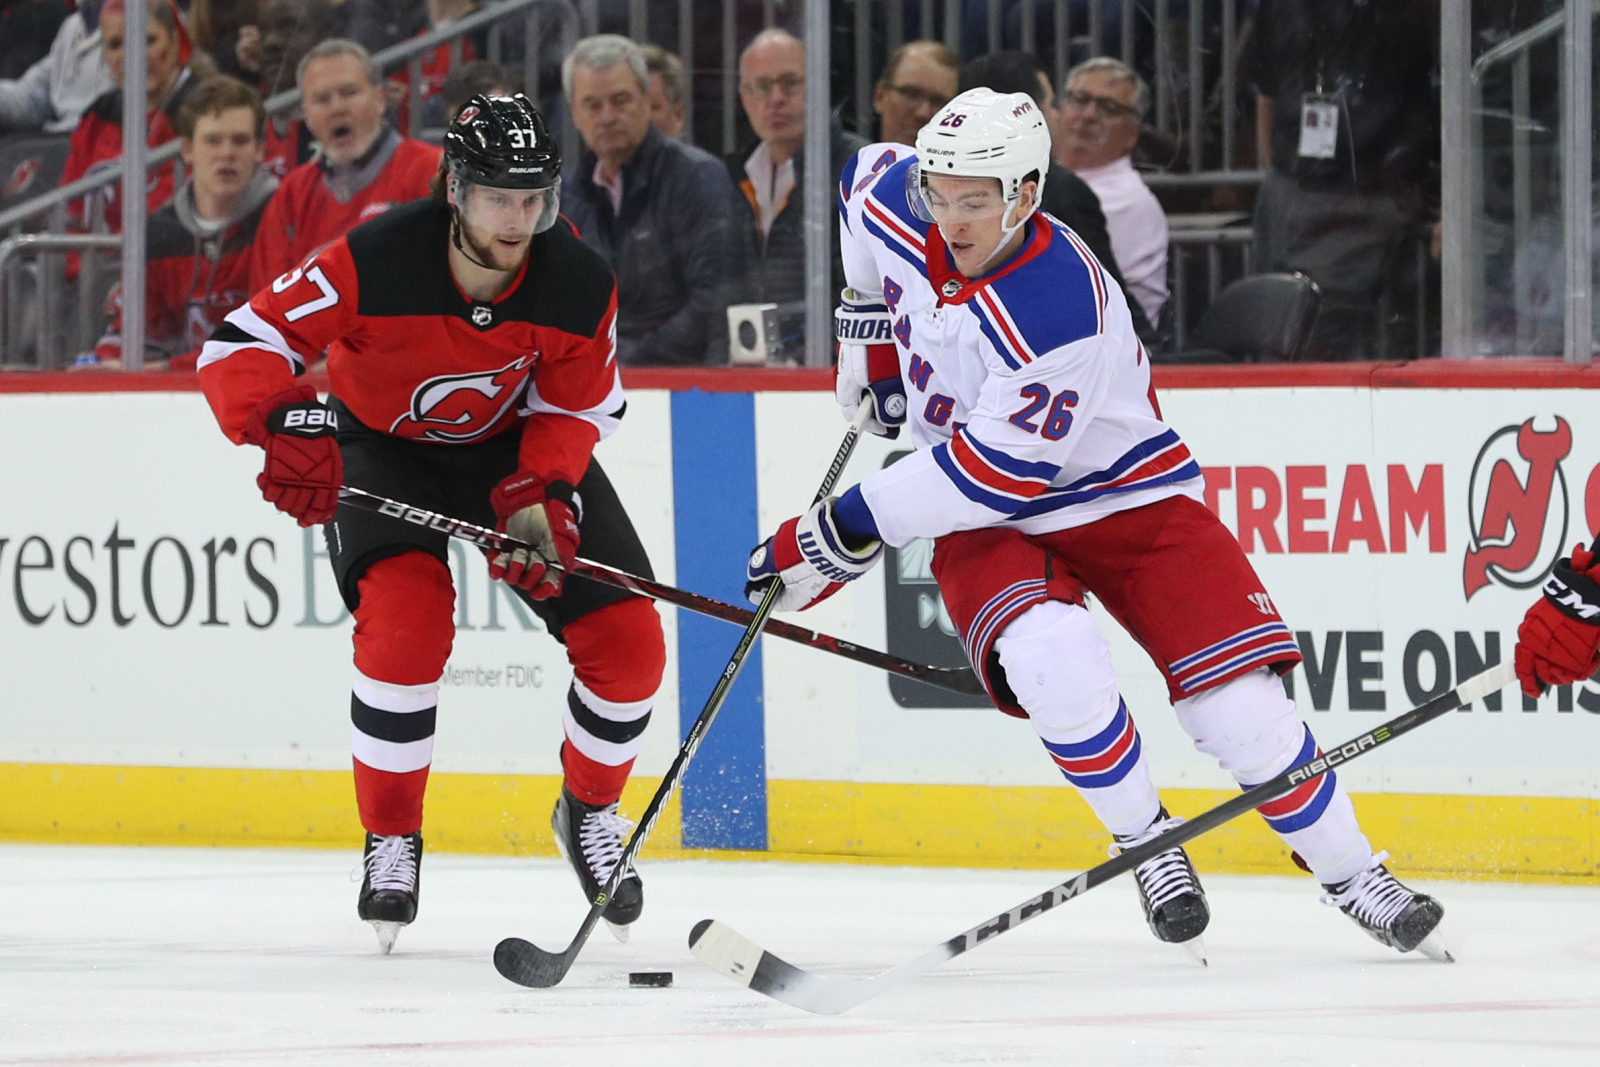 Jimmy Vesey can provide Rangers unique Devils perspective